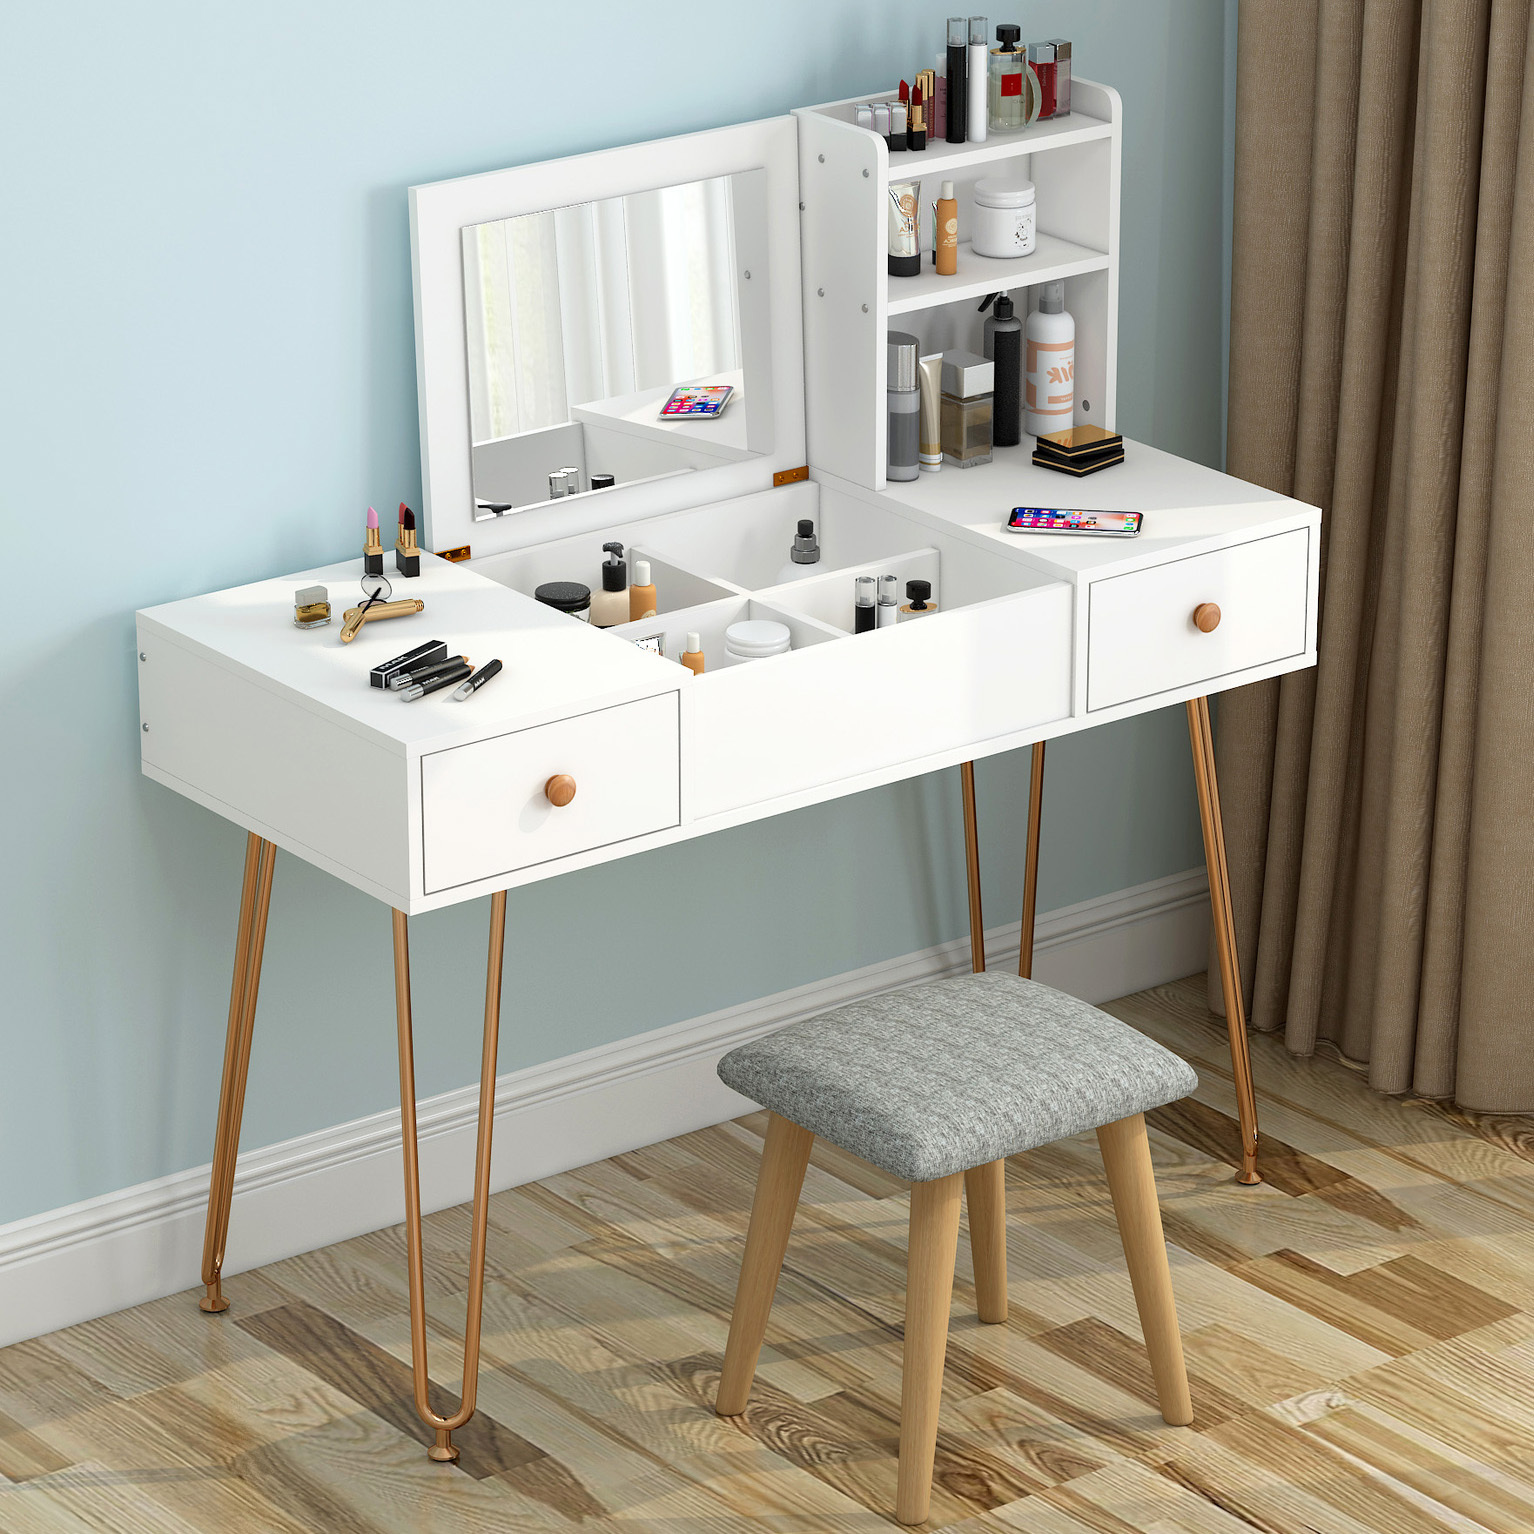 Empress Large Dresser Vanity Table with Mirror, Stool and Storage Shelves Set (White)